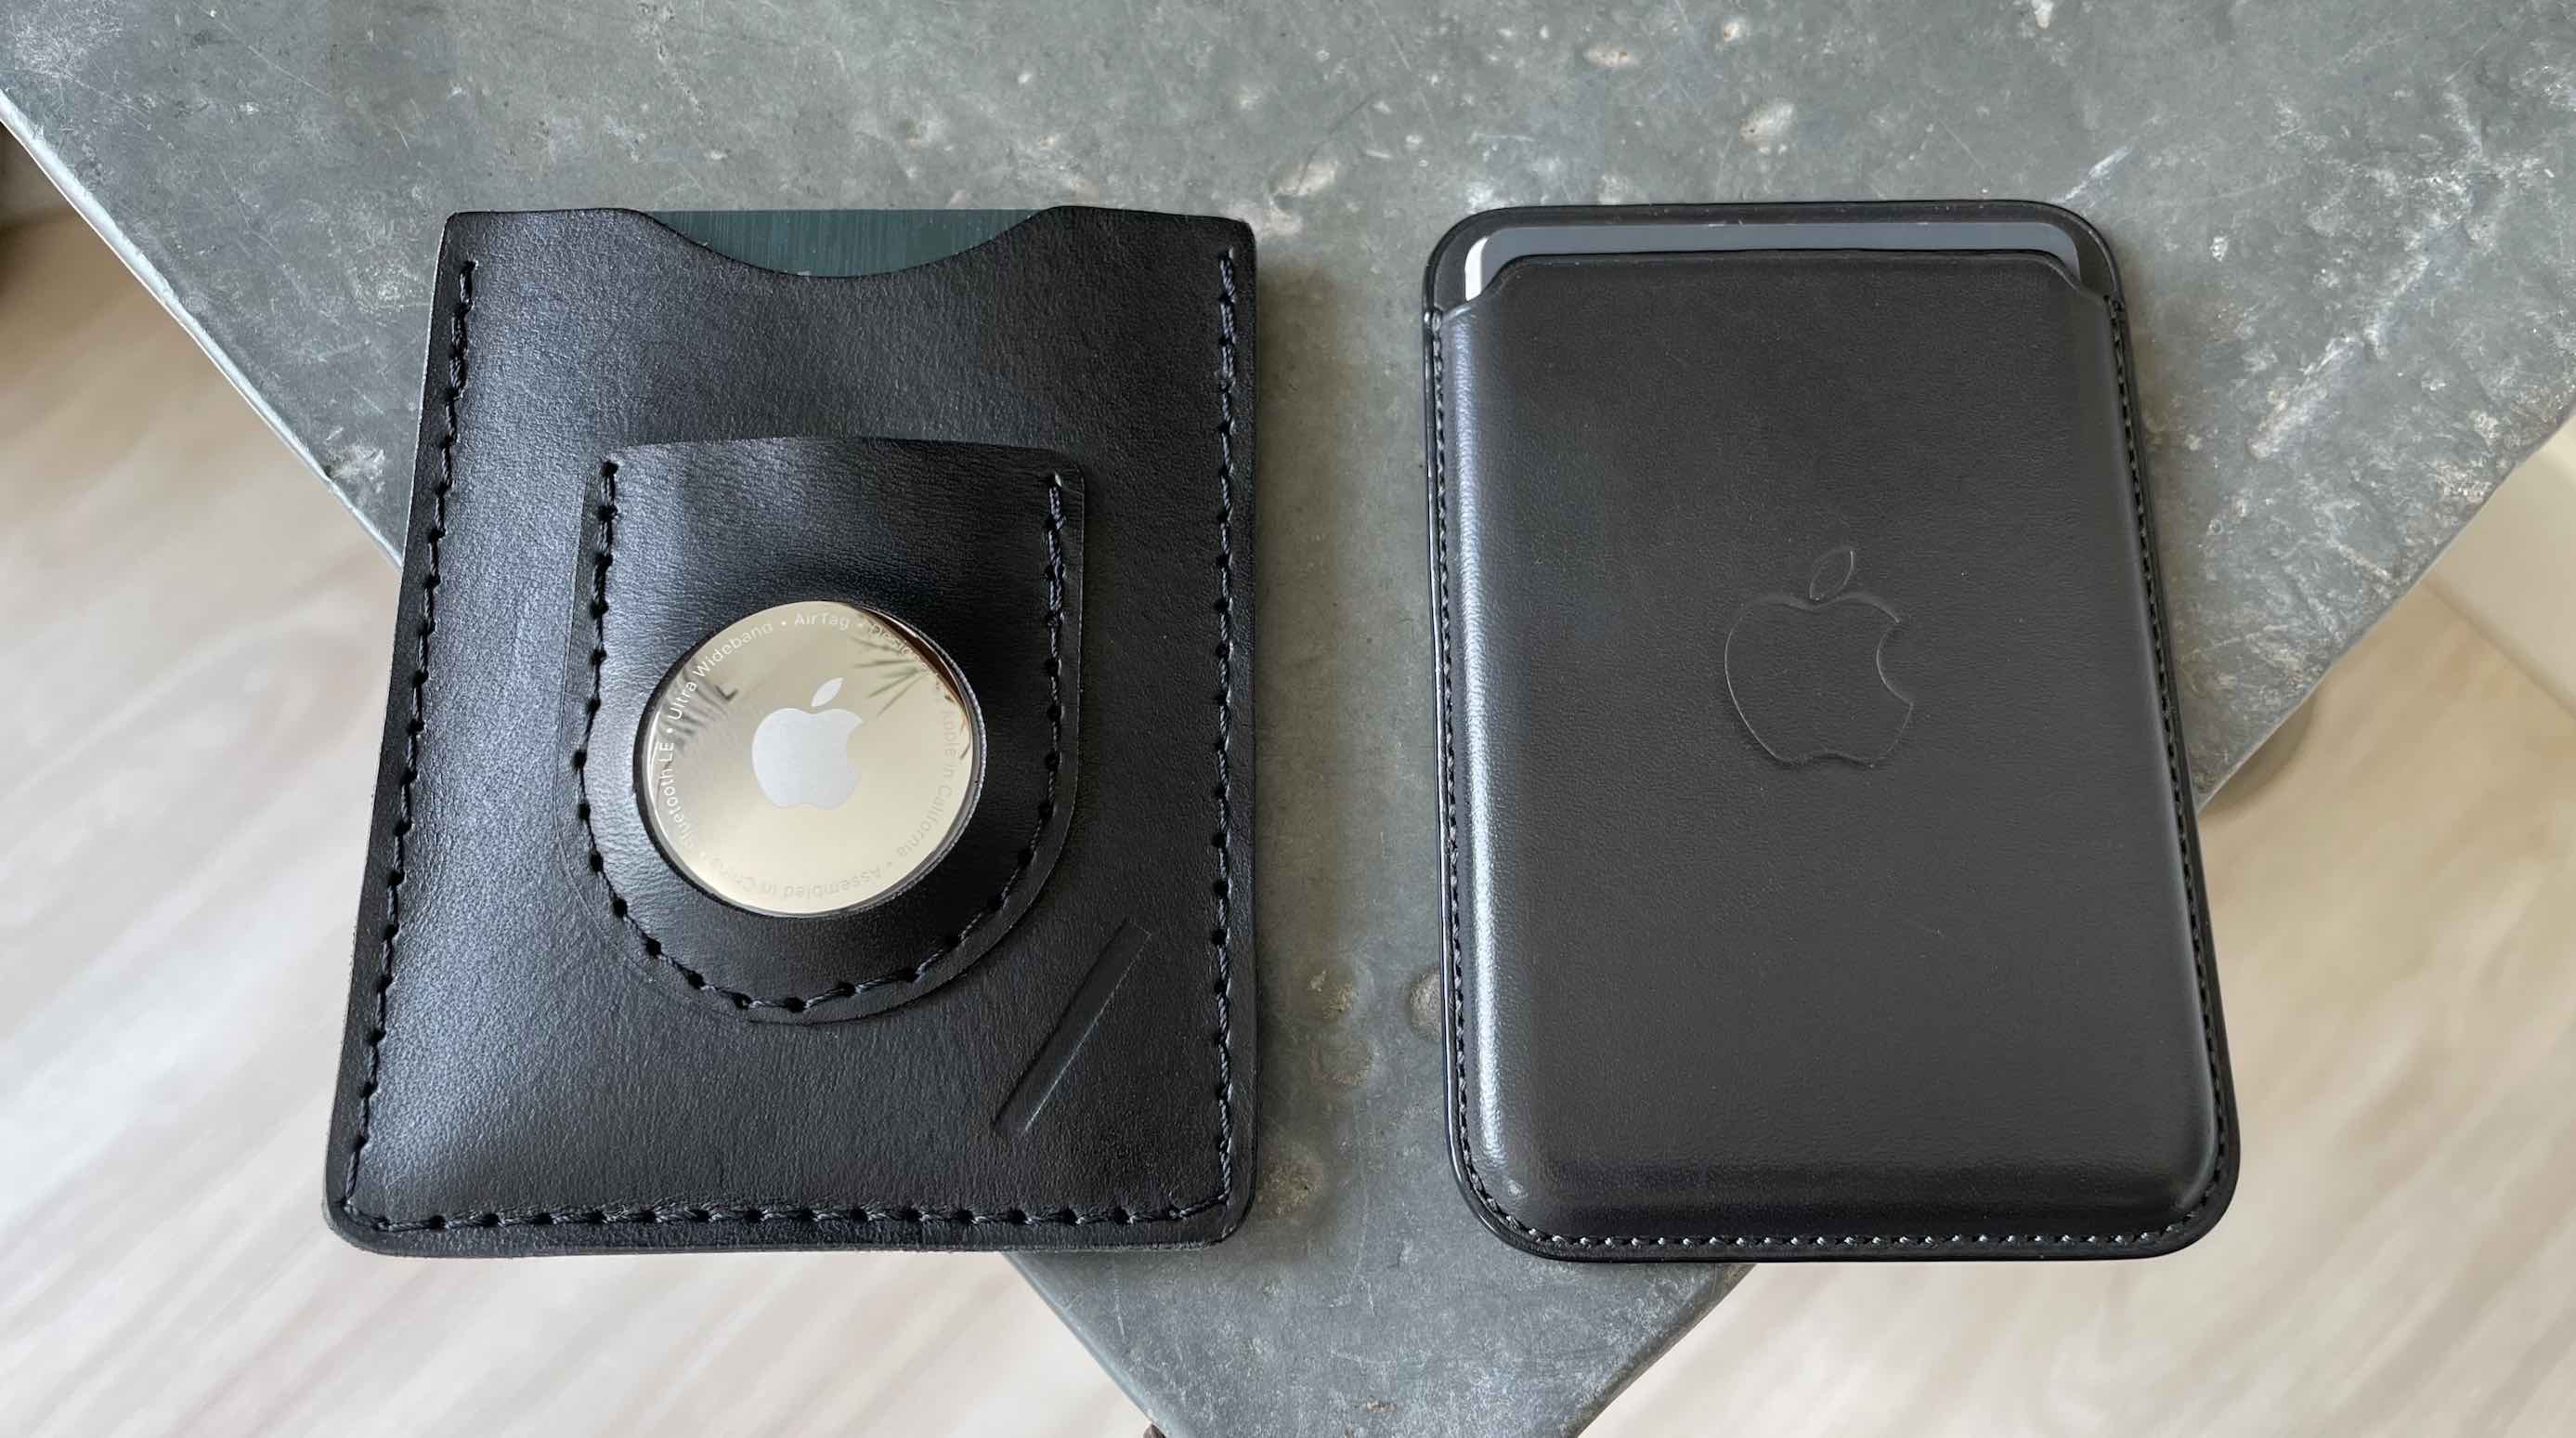 Snapback Slim Air wallet for AirTags - next to Apple's MagSafe Leather Wallet for iPhone 12